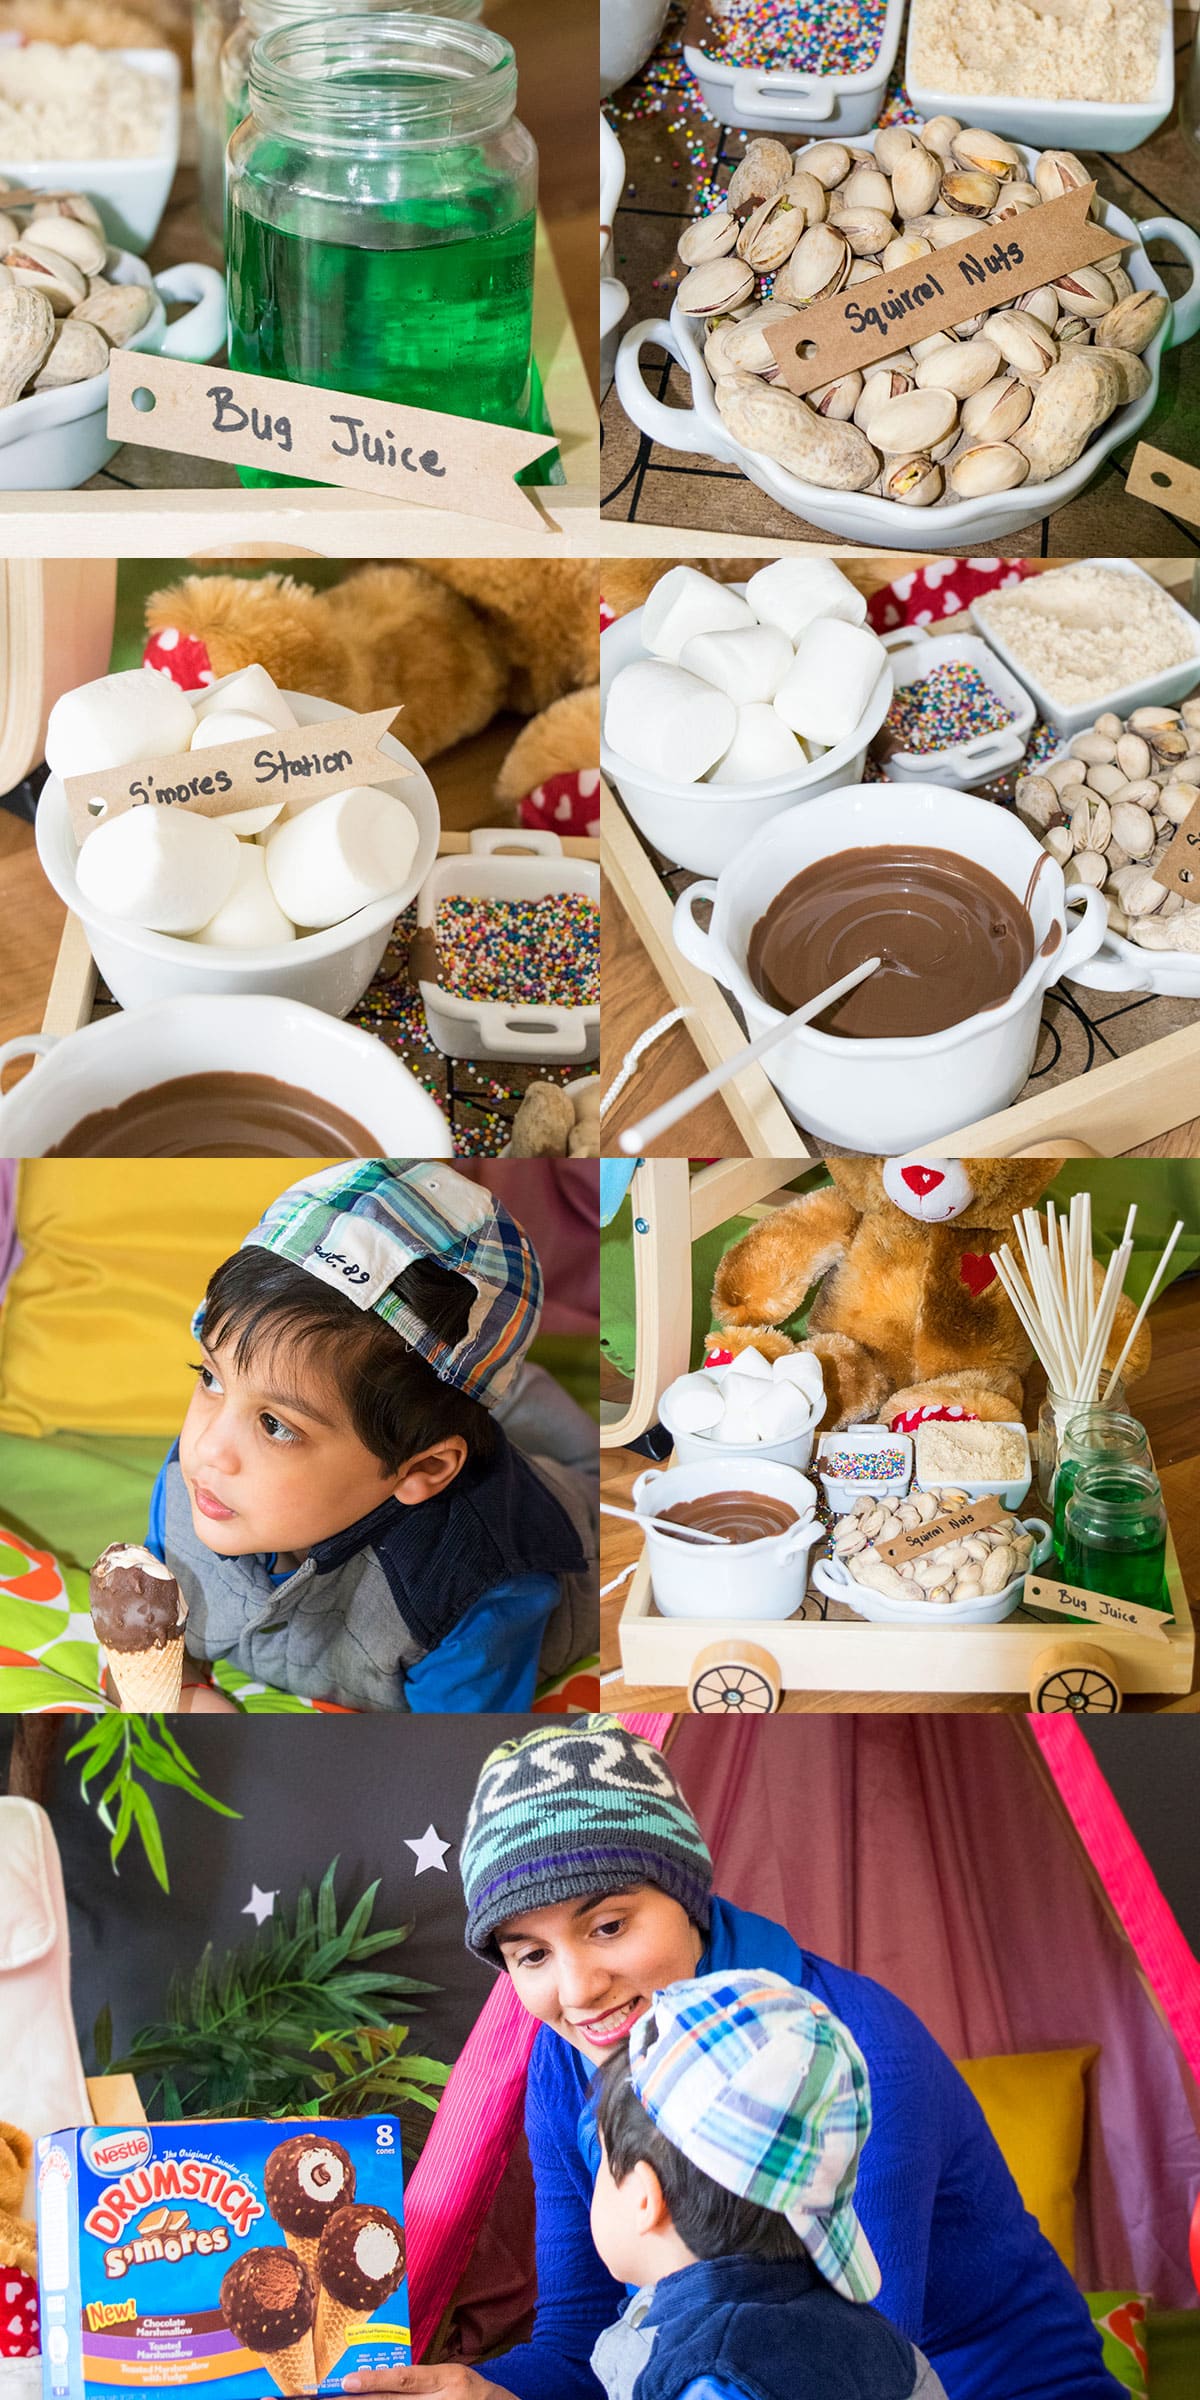 Collage Image With Camping Party Food.